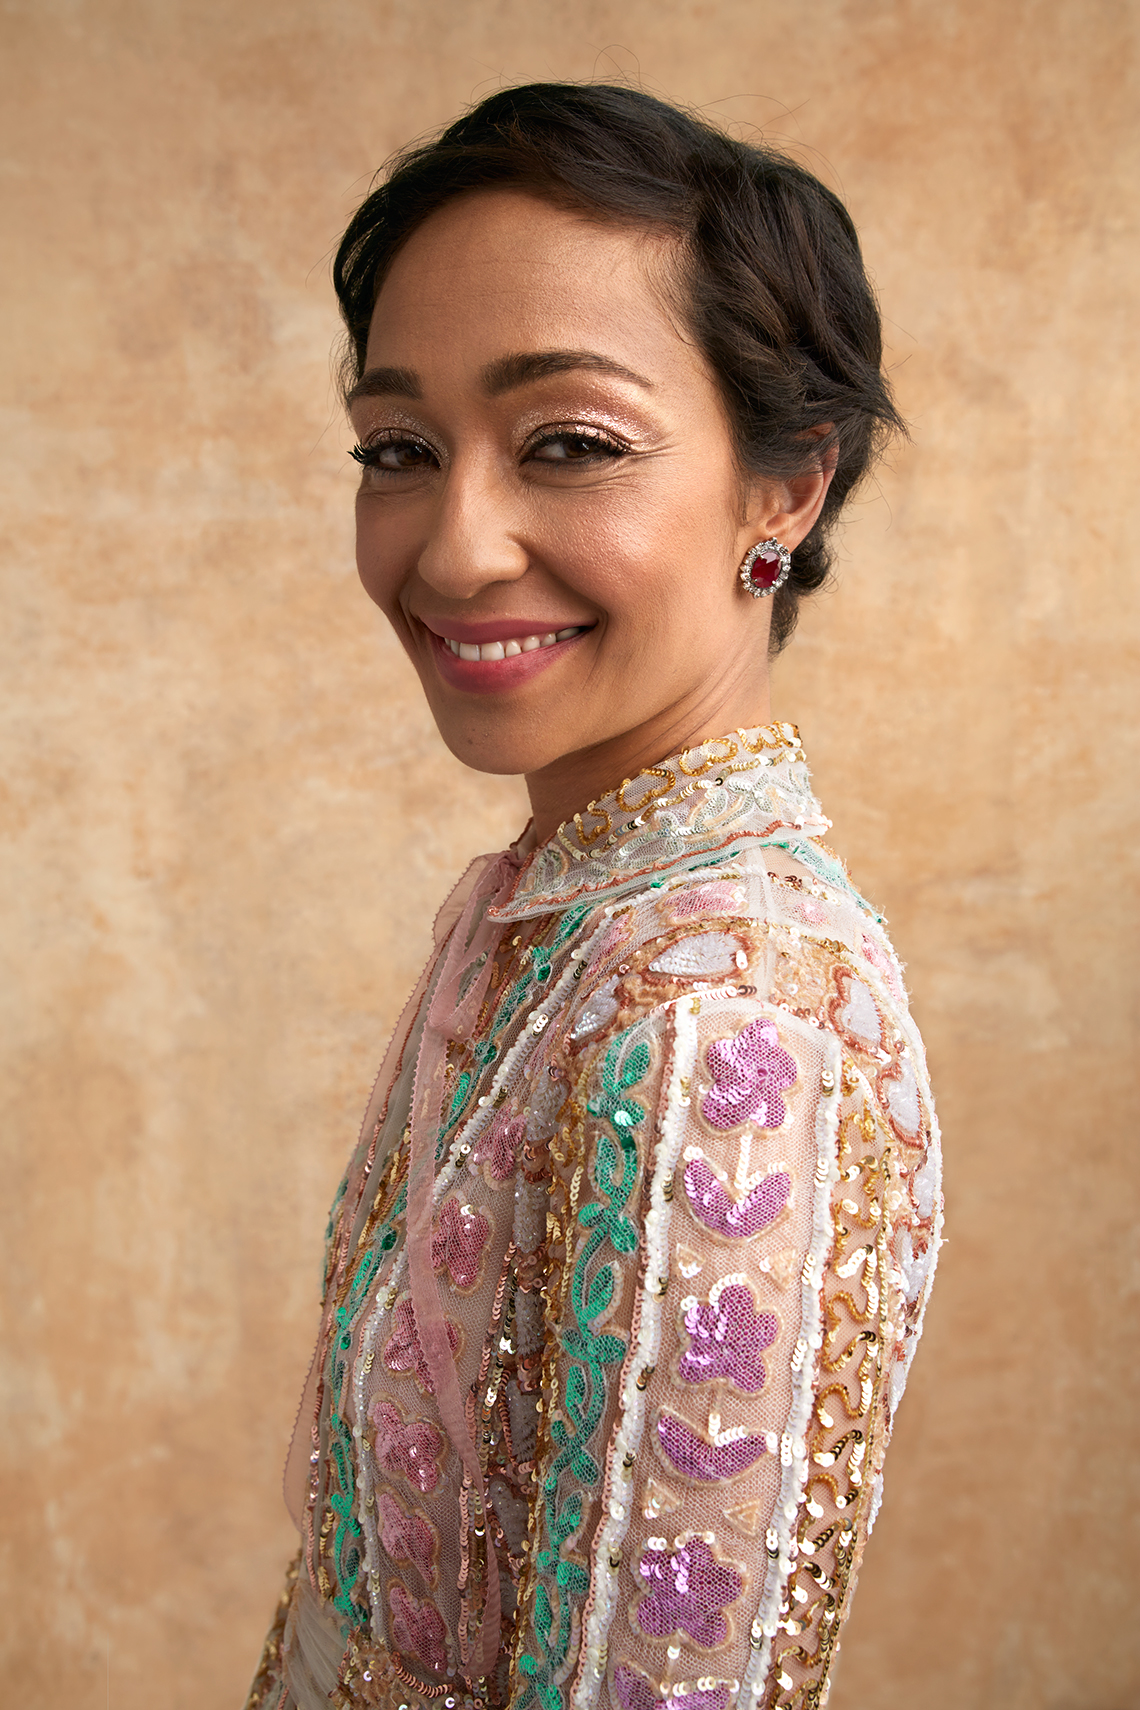 Ruth Negga at the 16th Annual AARP The Magazine's Movies for Grownups Awards